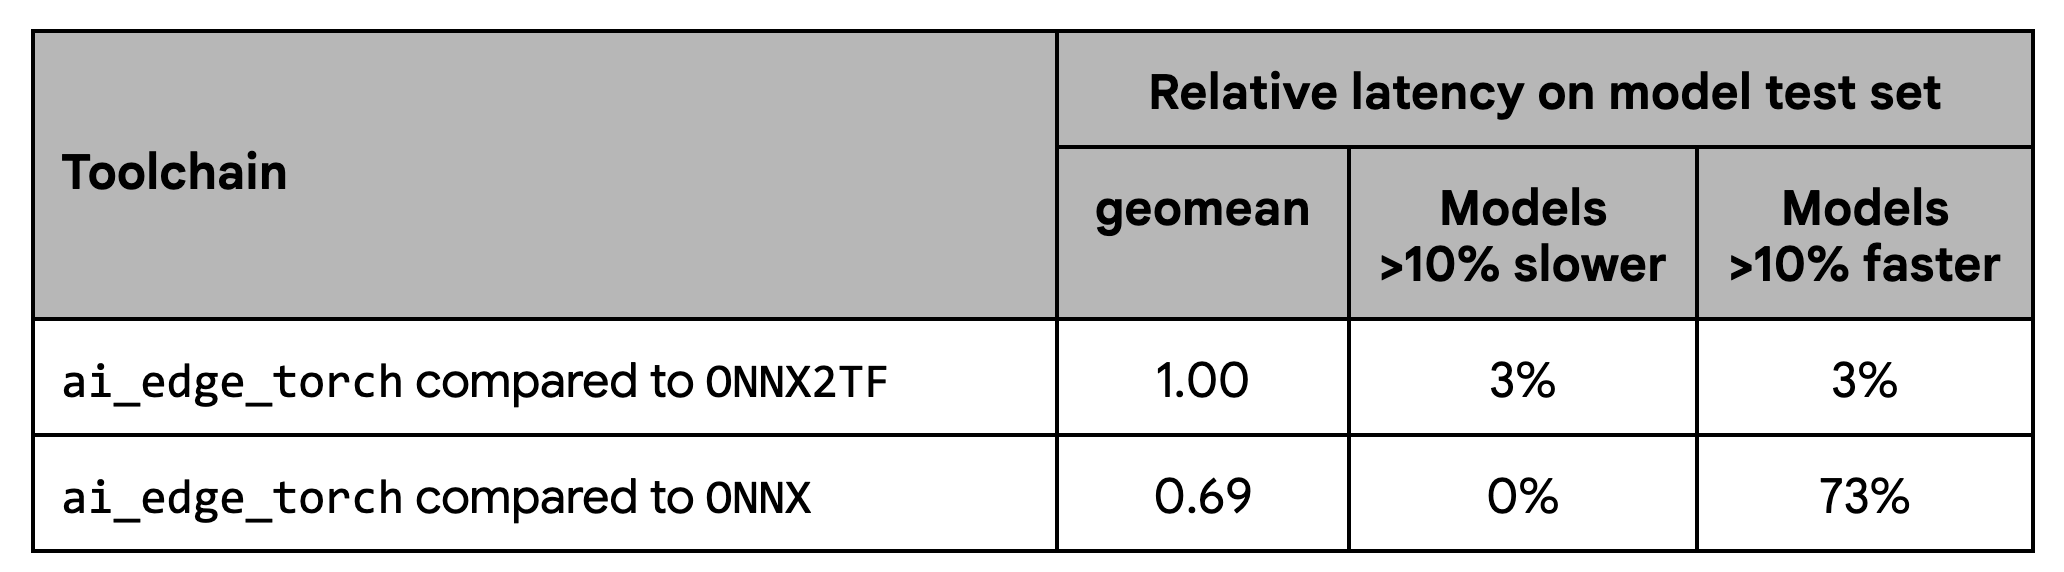 Table showing performance with ONNX2TF baseline